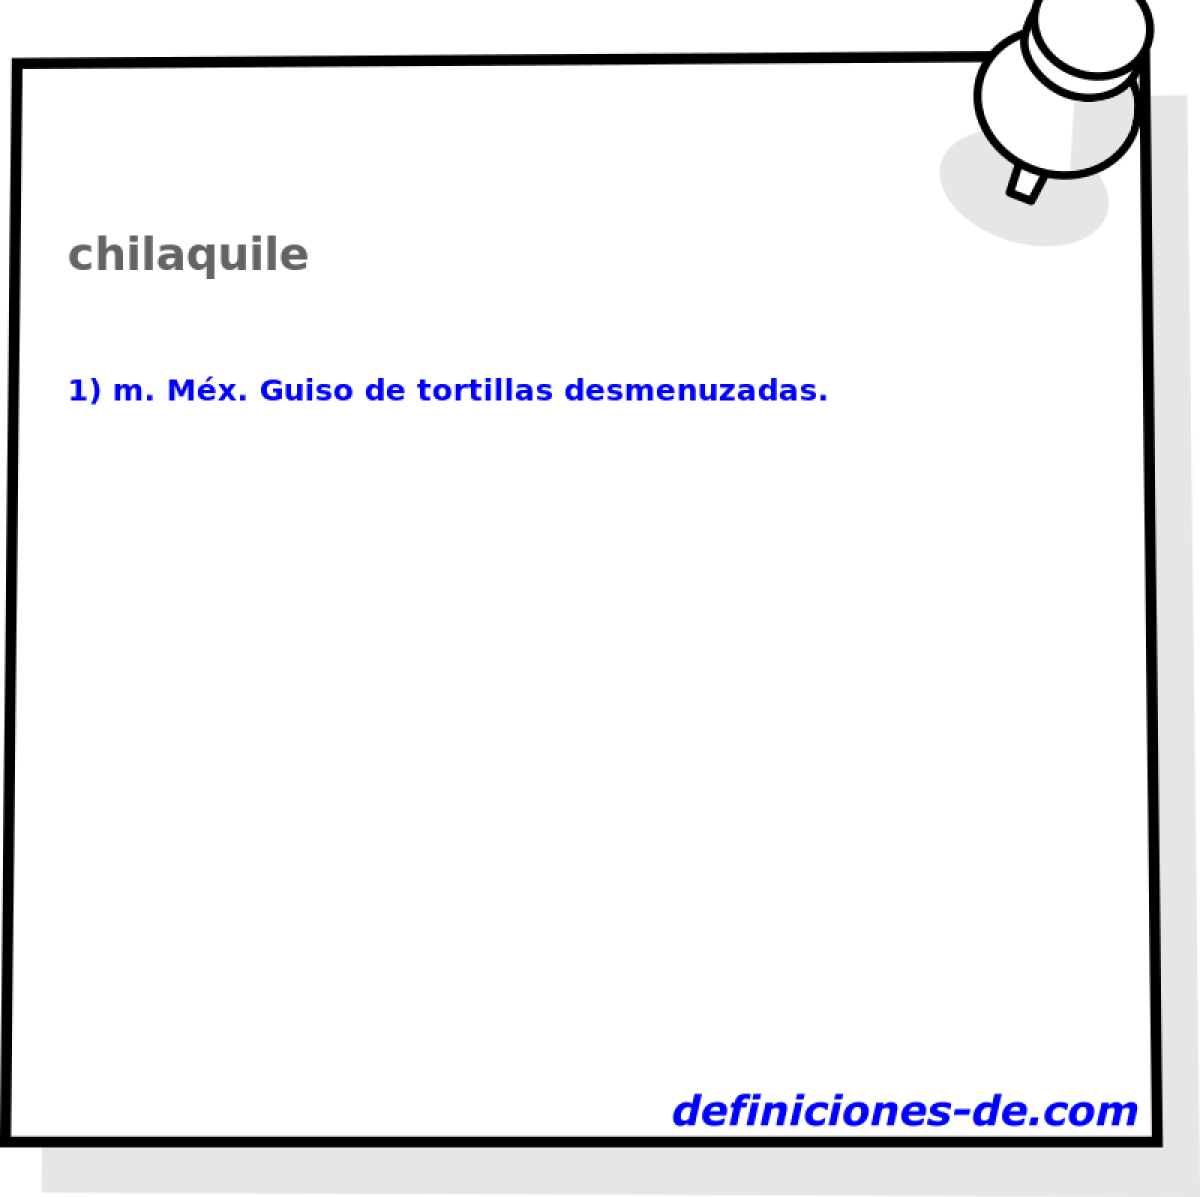 chilaquile 